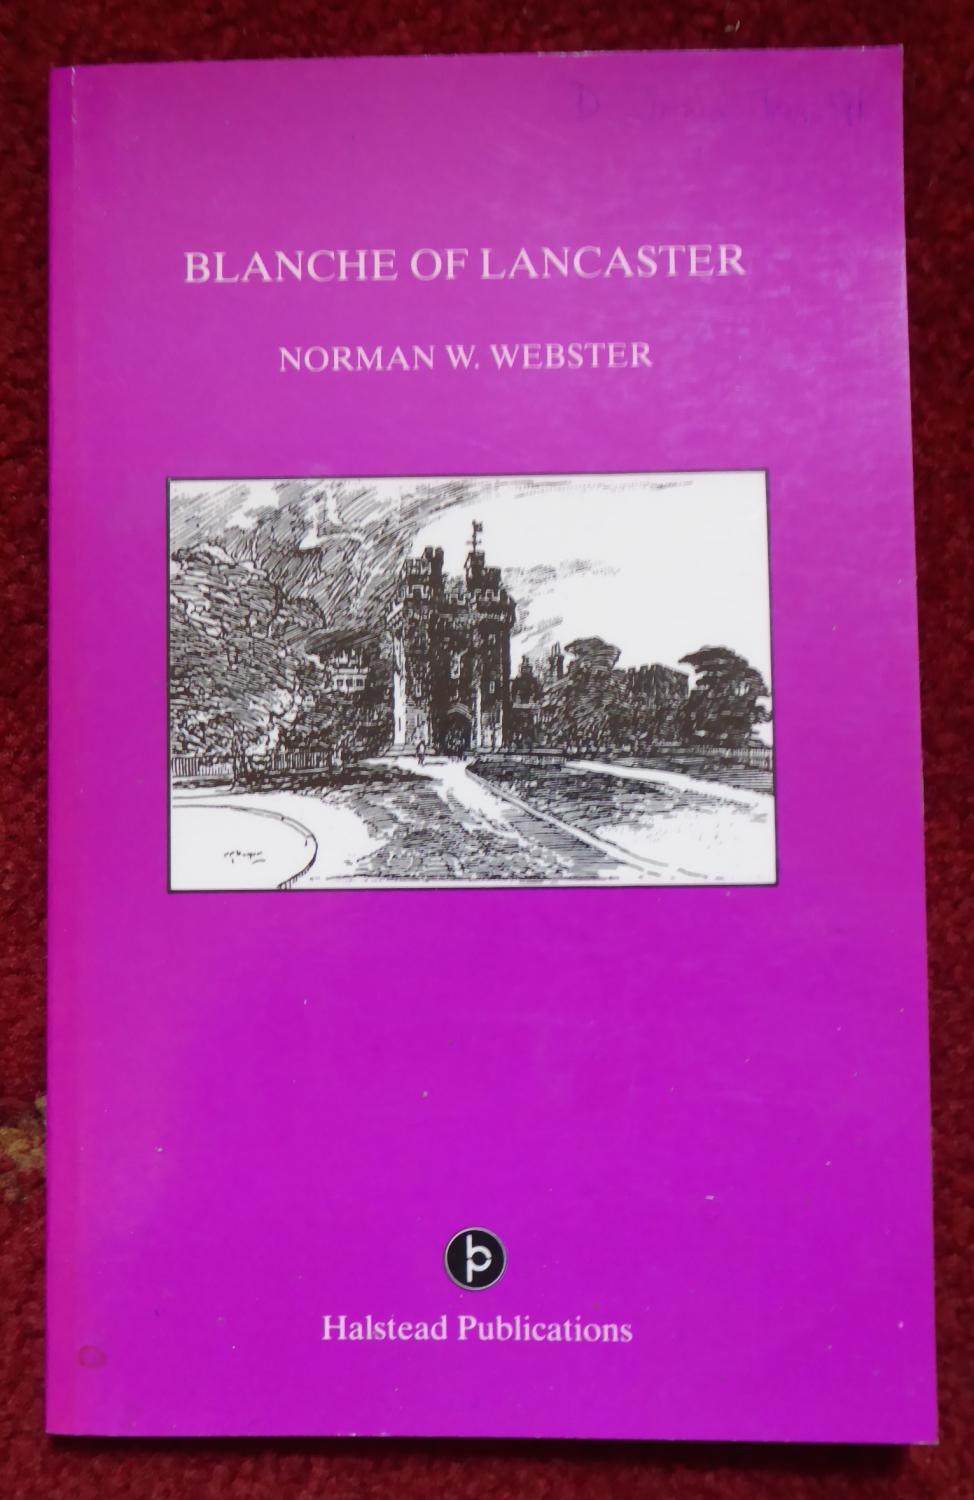 Blanche of Lancaster - Norman W. Webster